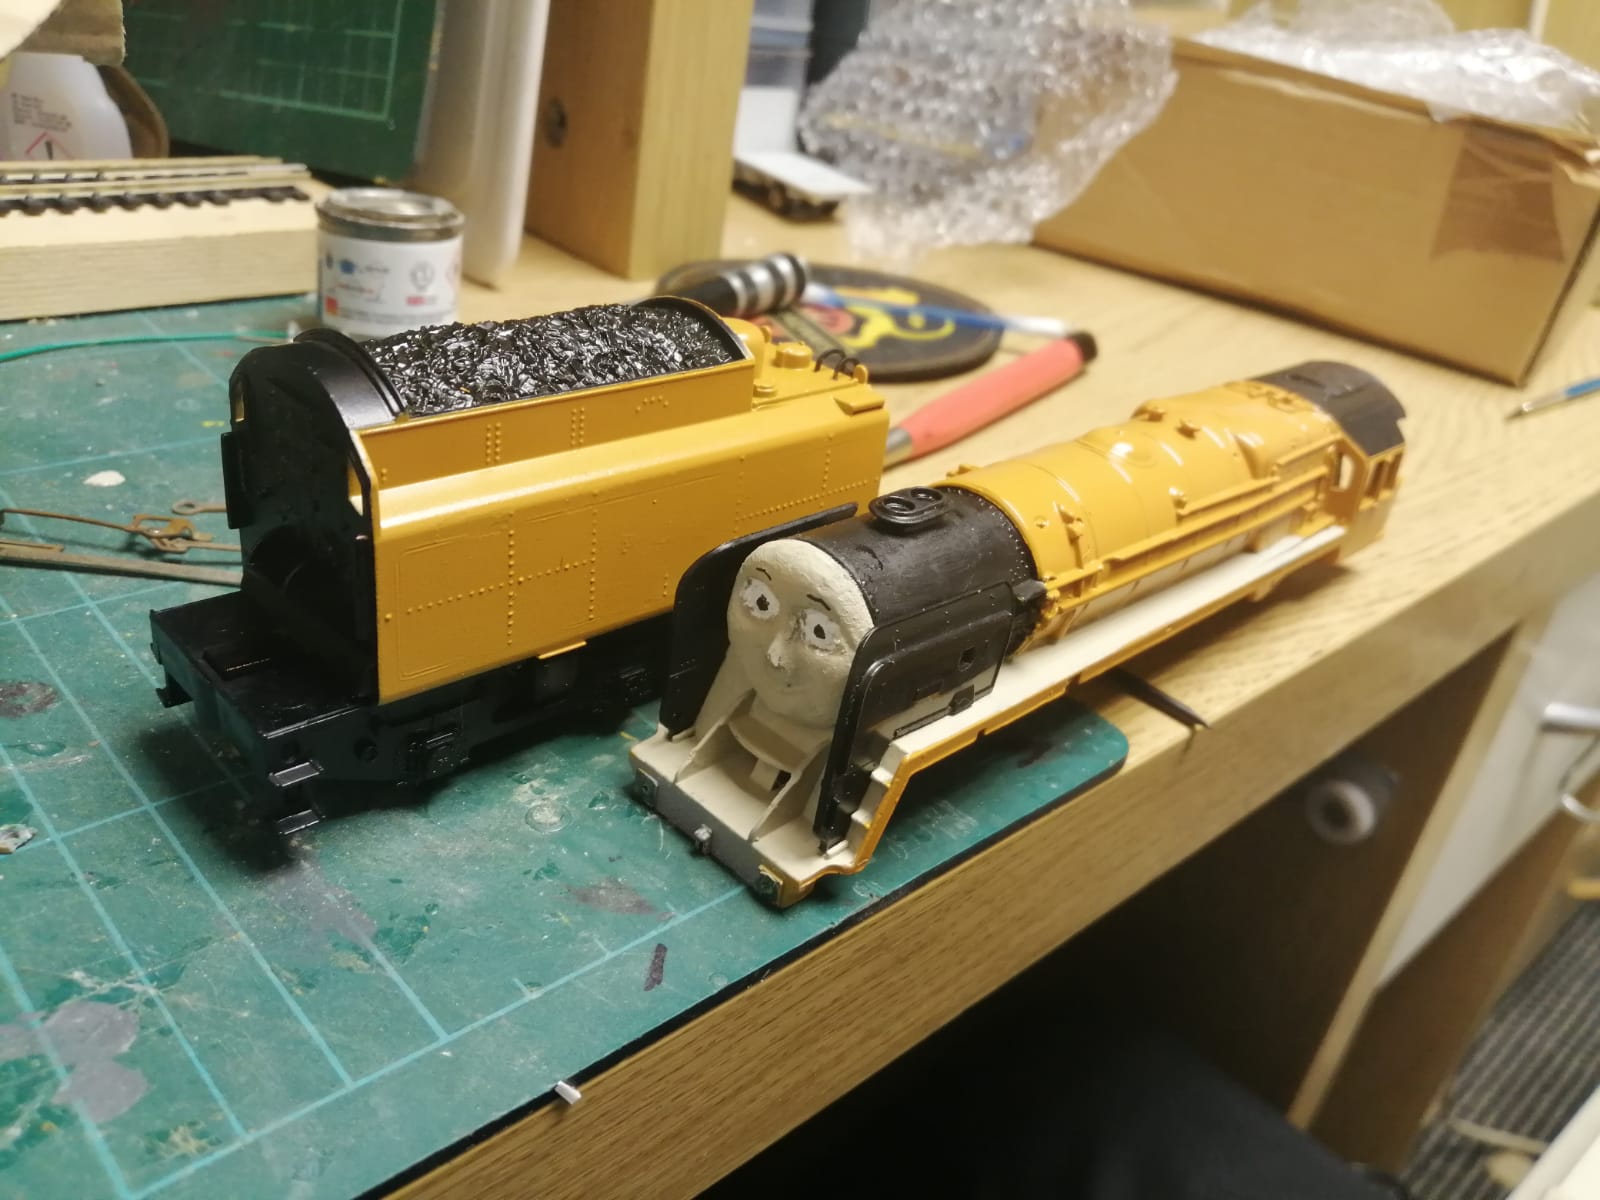 Custom model of Murdoch from Thomas the tank engine and friends.